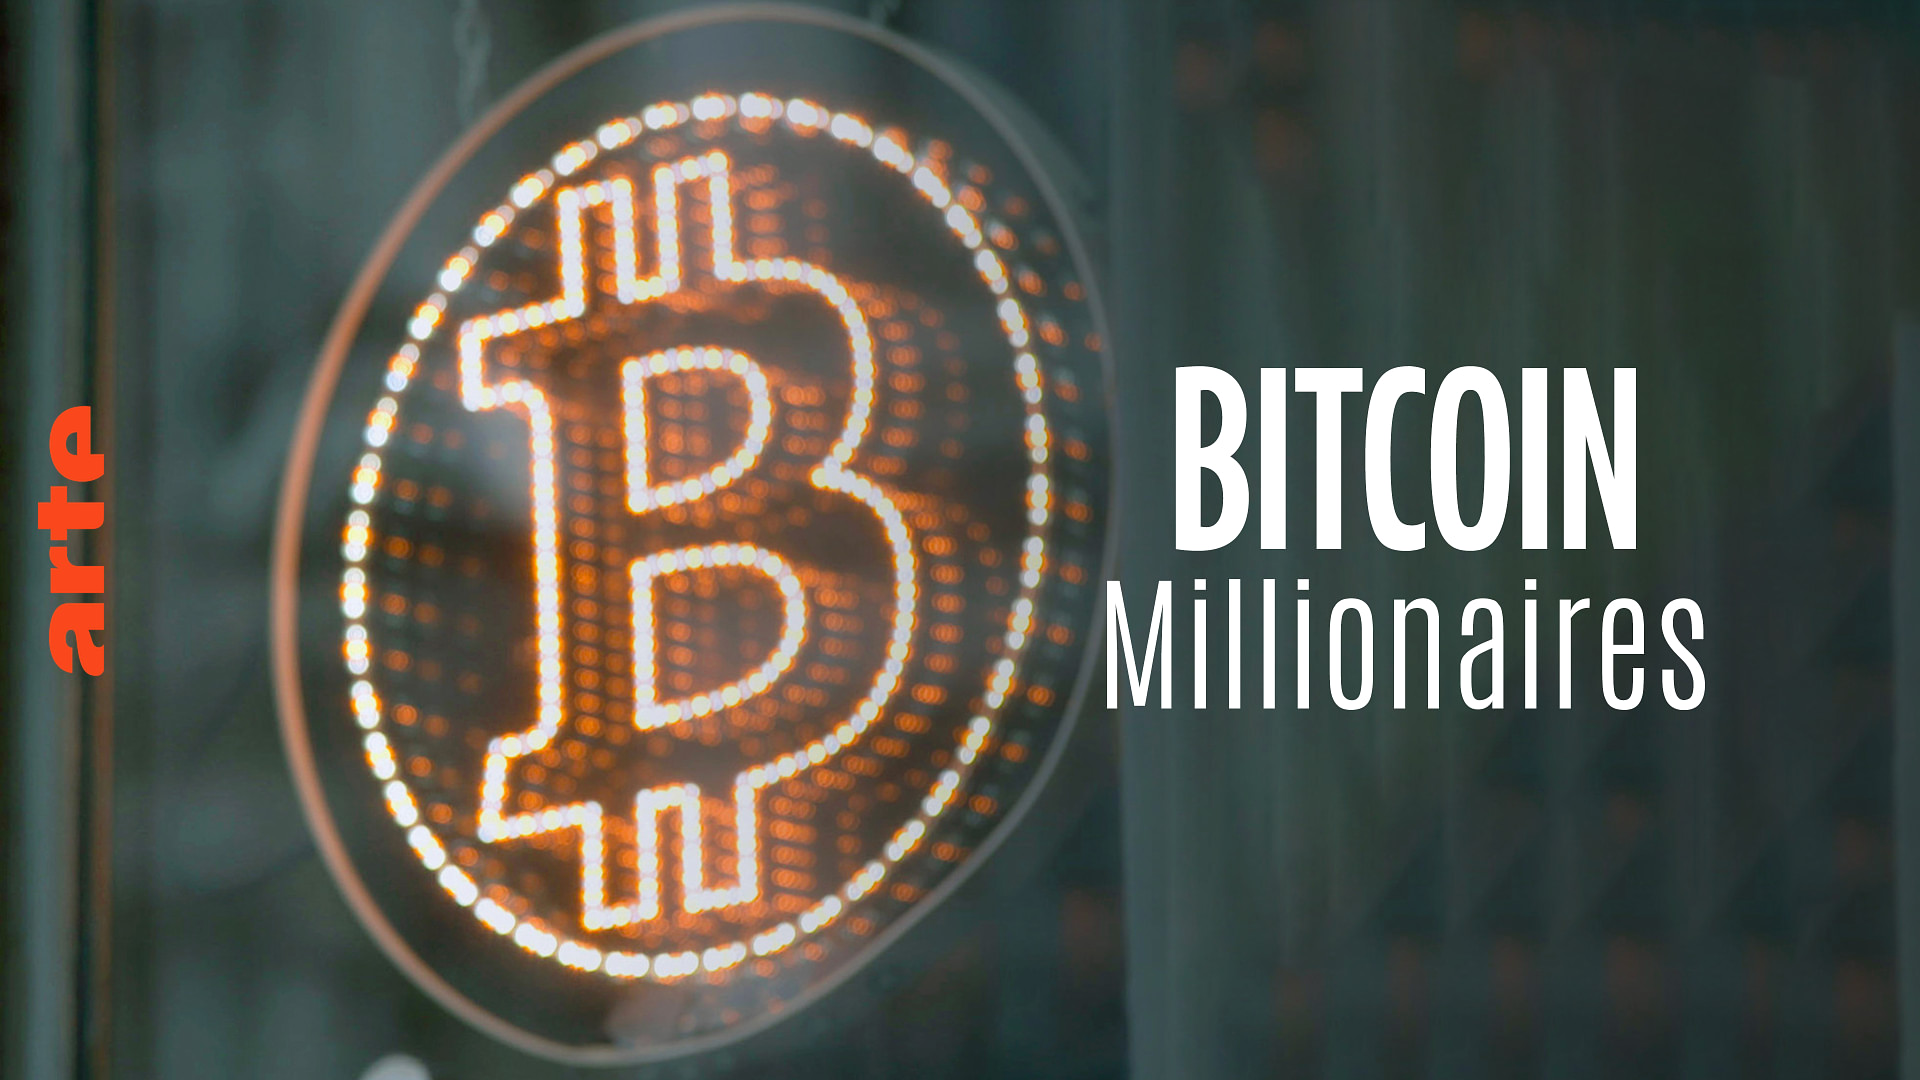 how many new crypto millionaires are there